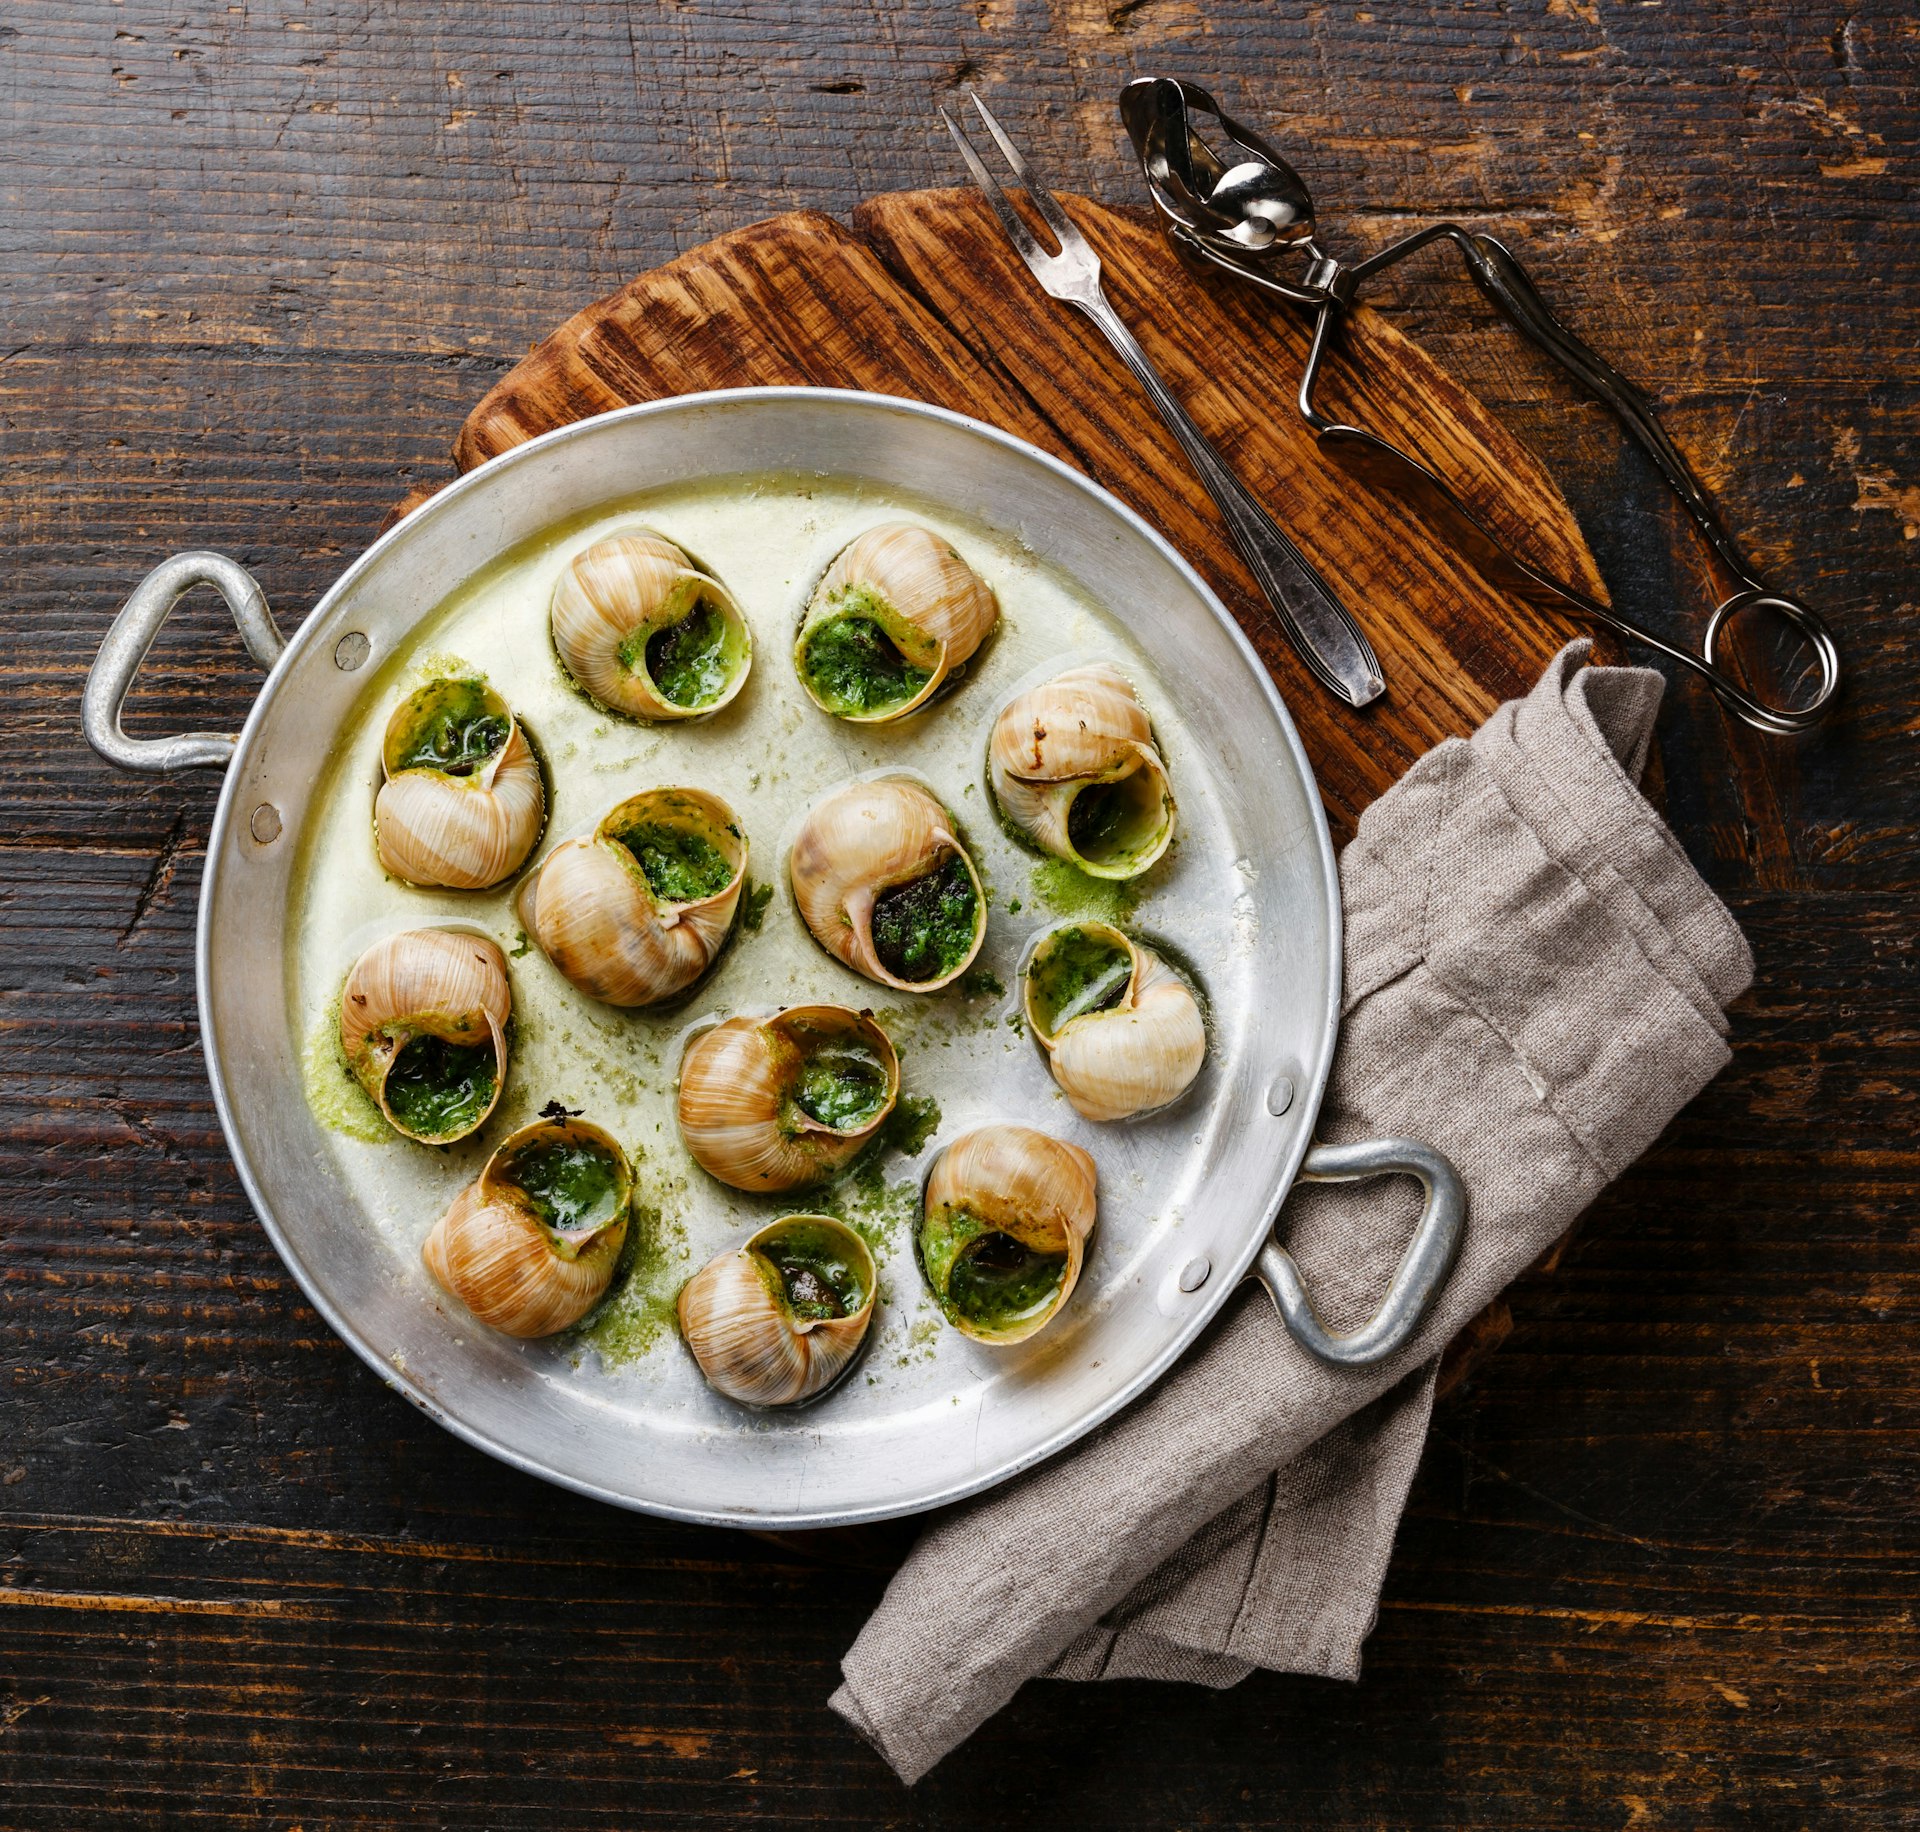 An aluminum pan of escargots de Bourgogne snails with garlic, herbs and butter in on rustic wooden table